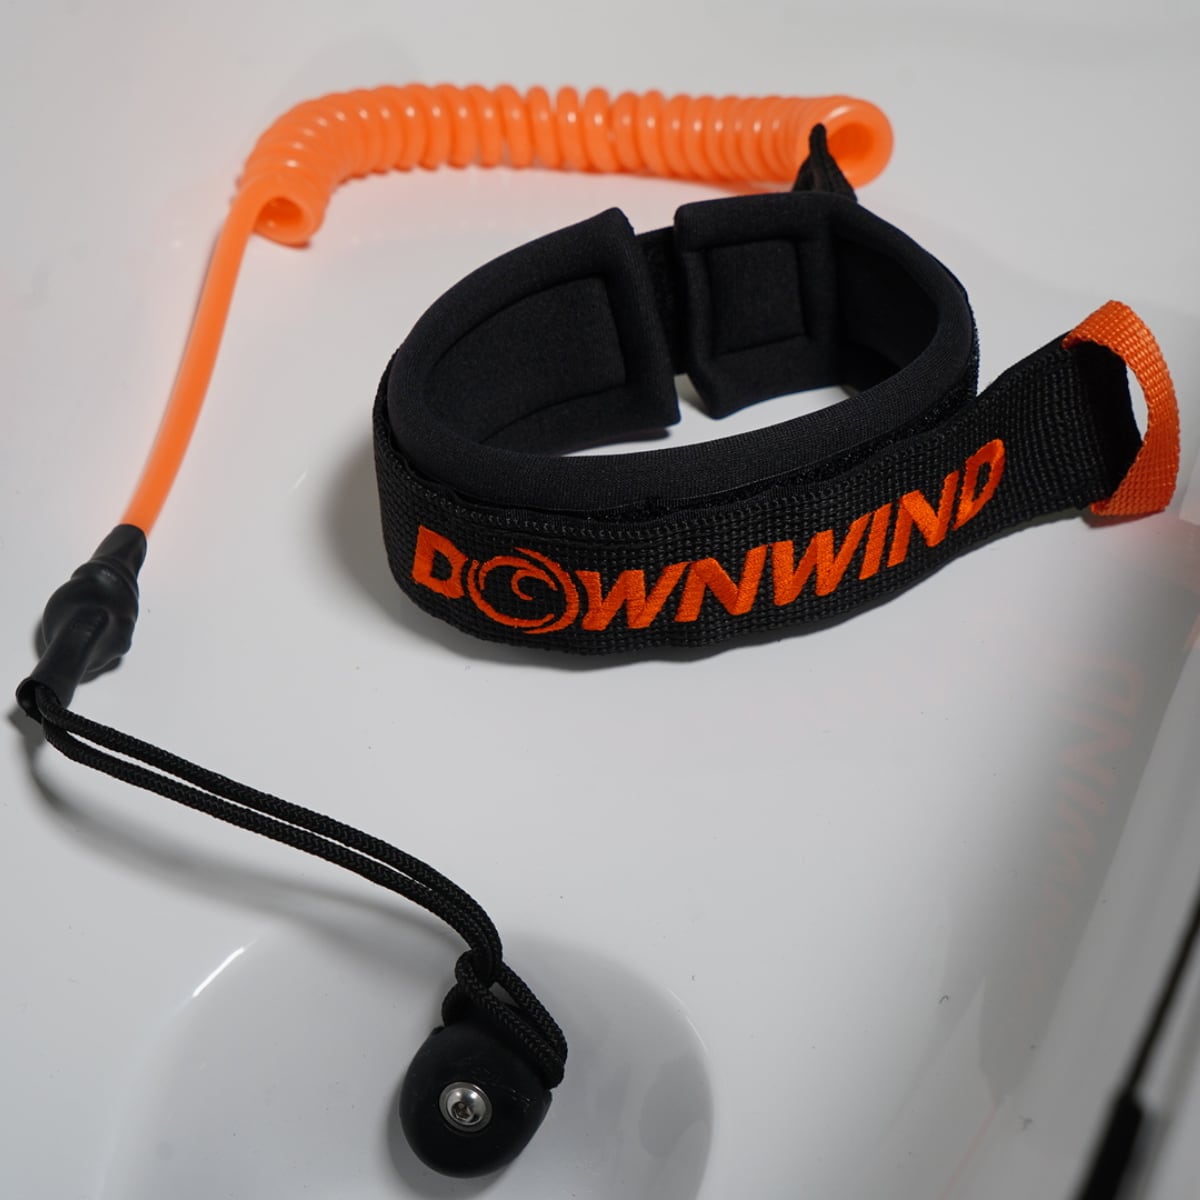 Downwind Leg Leash connected with surfski